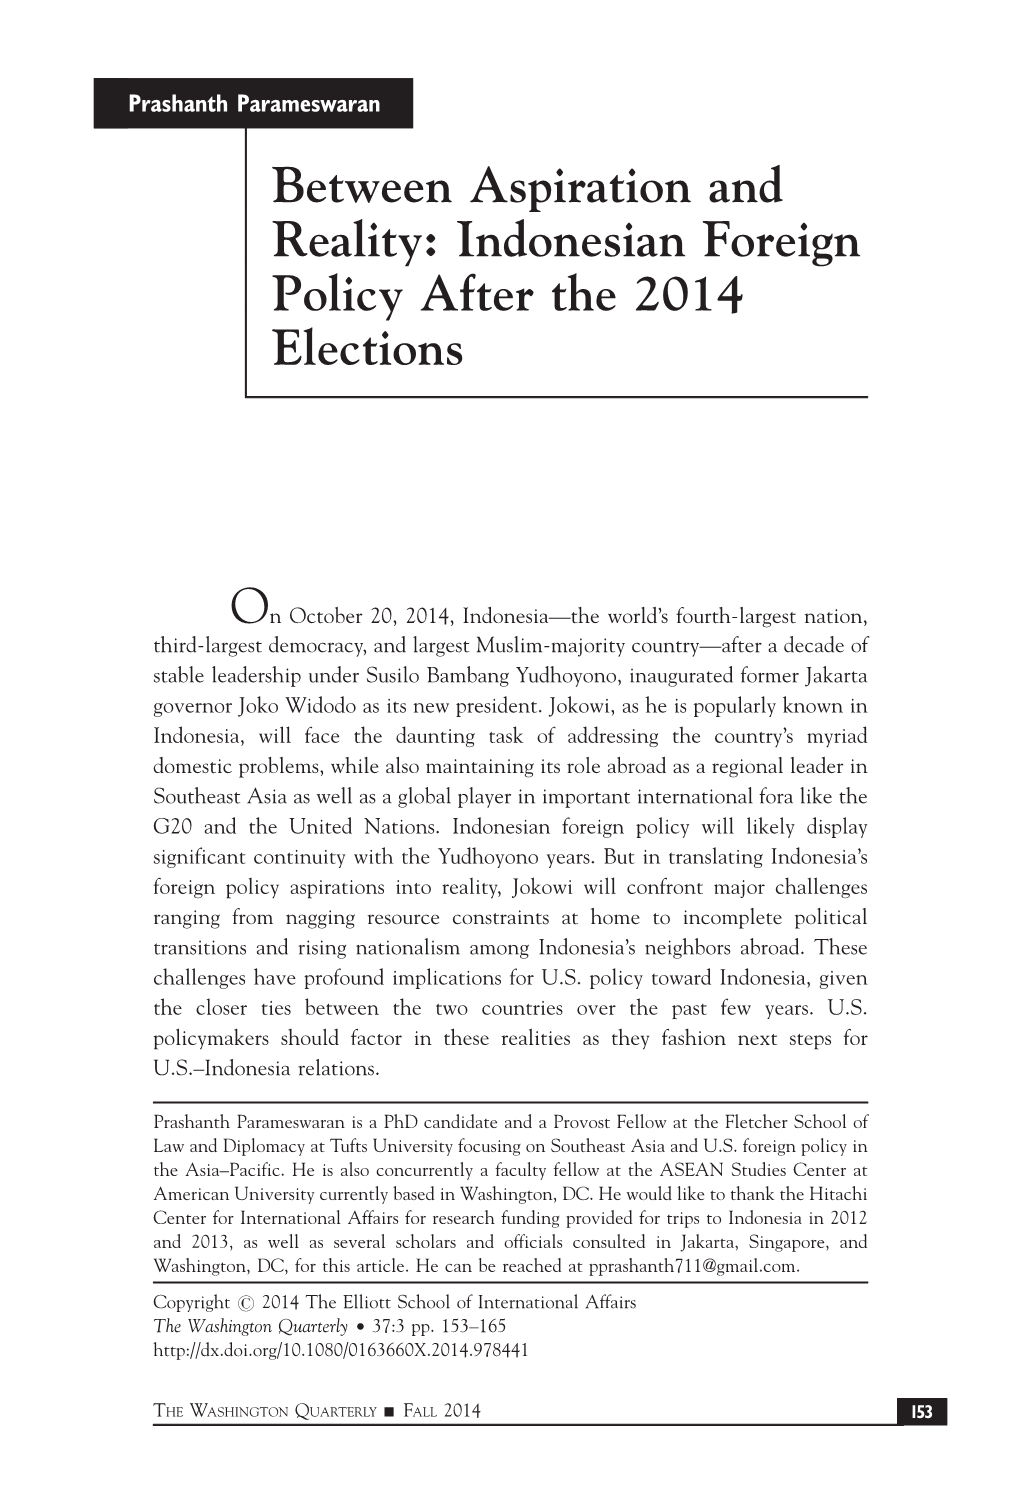 Indonesian Foreign Policy After the 2014 Elections